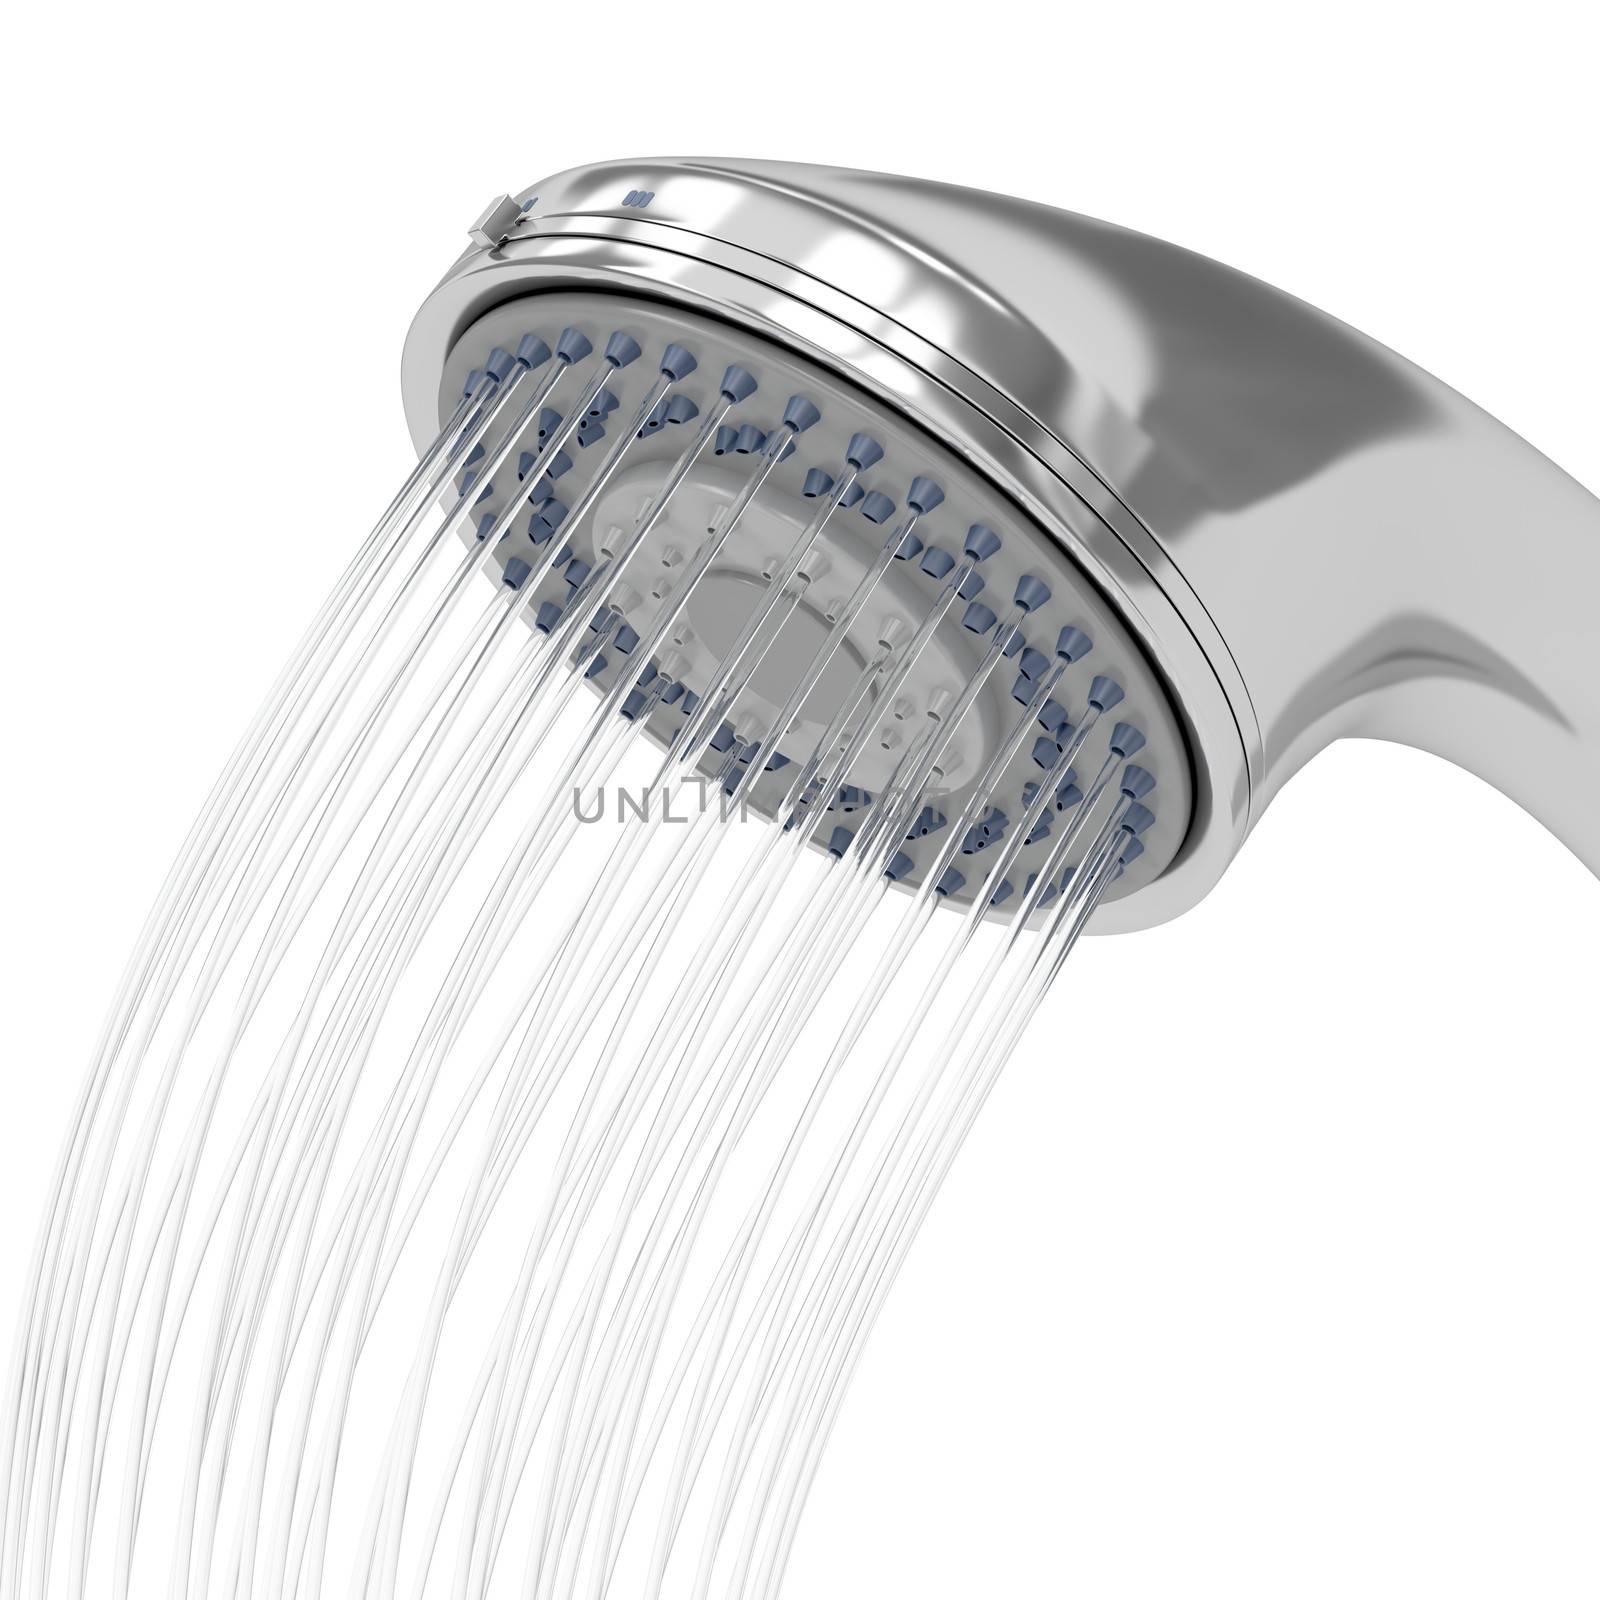 Shower head with flowing water